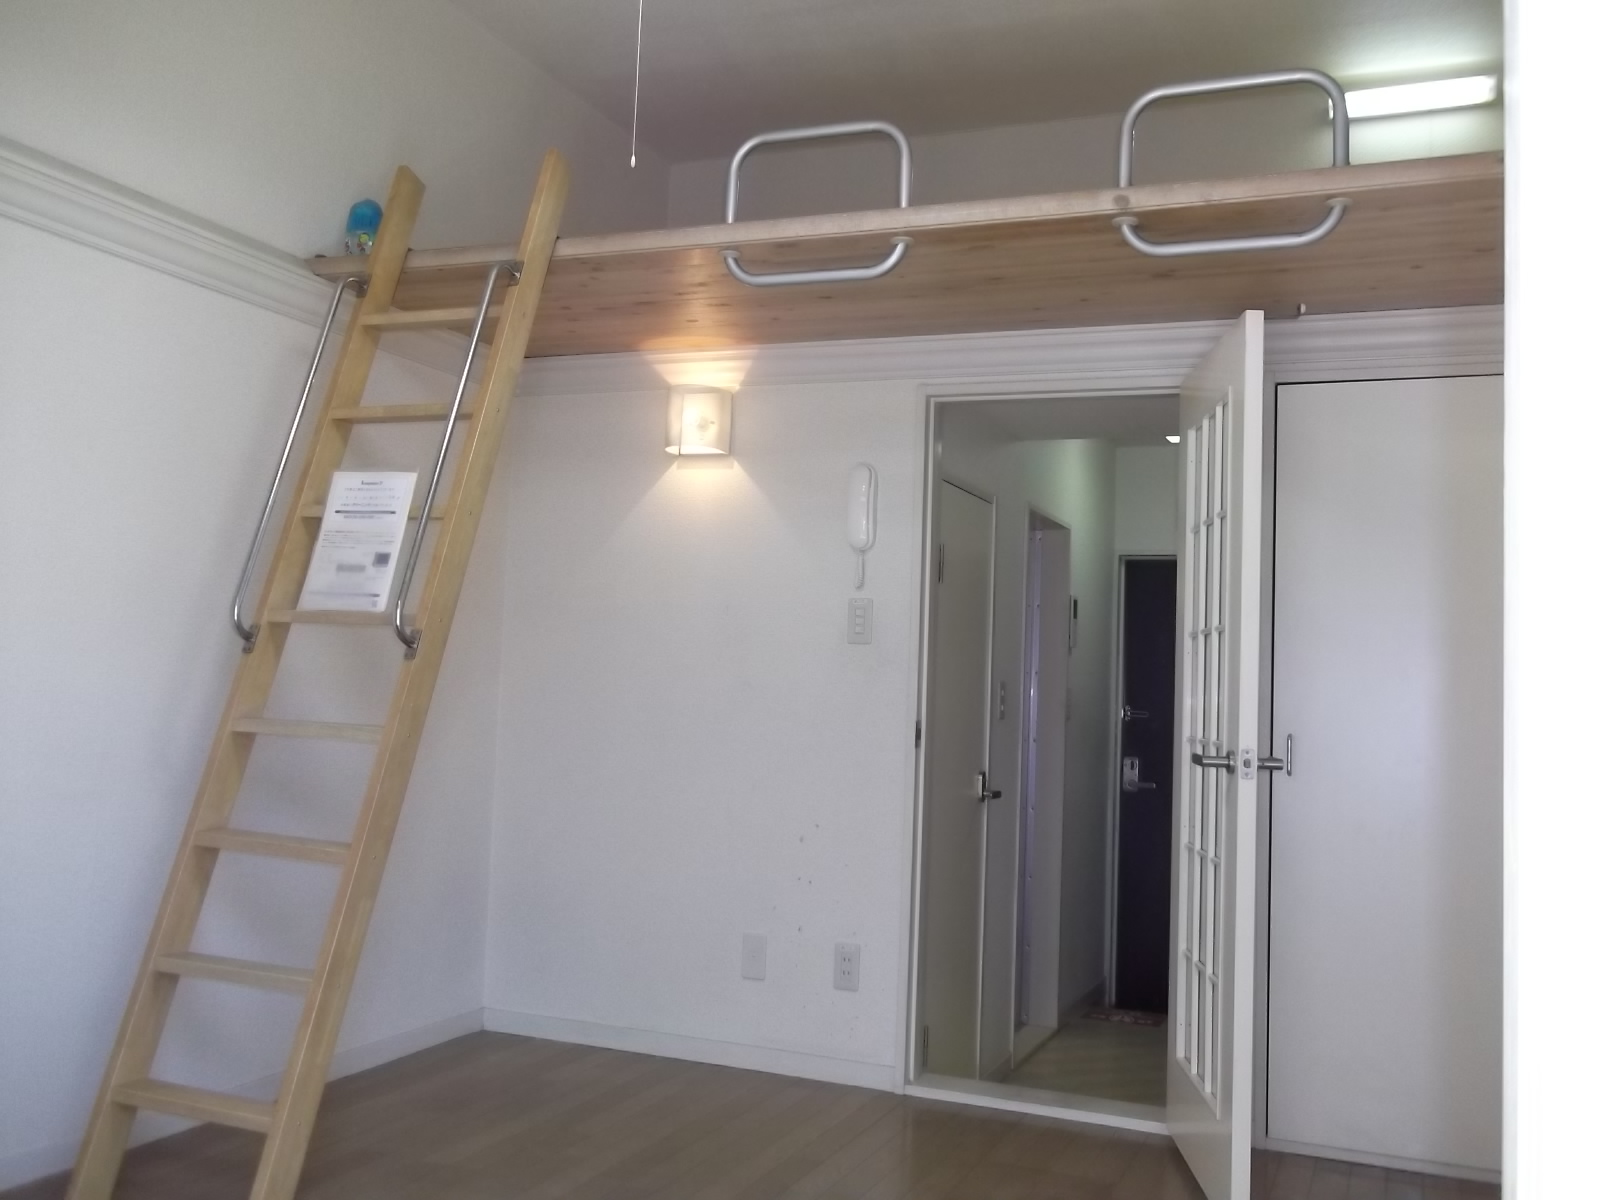 Other room space. It is with loft space on top of the ladder